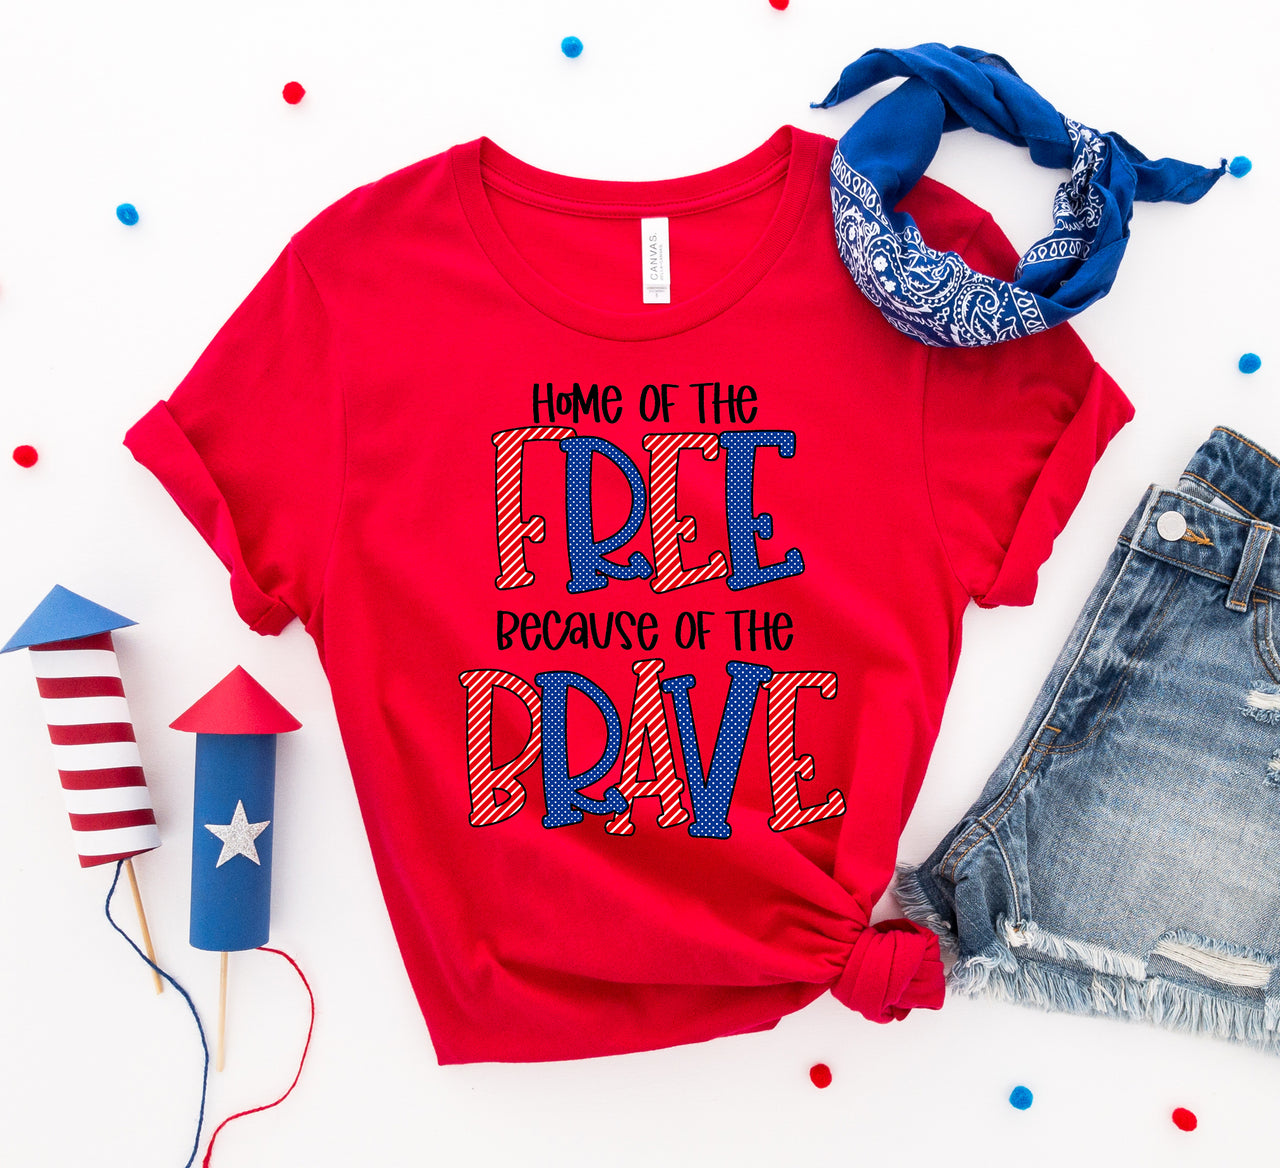 Home of the free because of the brave T-shirt - Mercantile Mountain